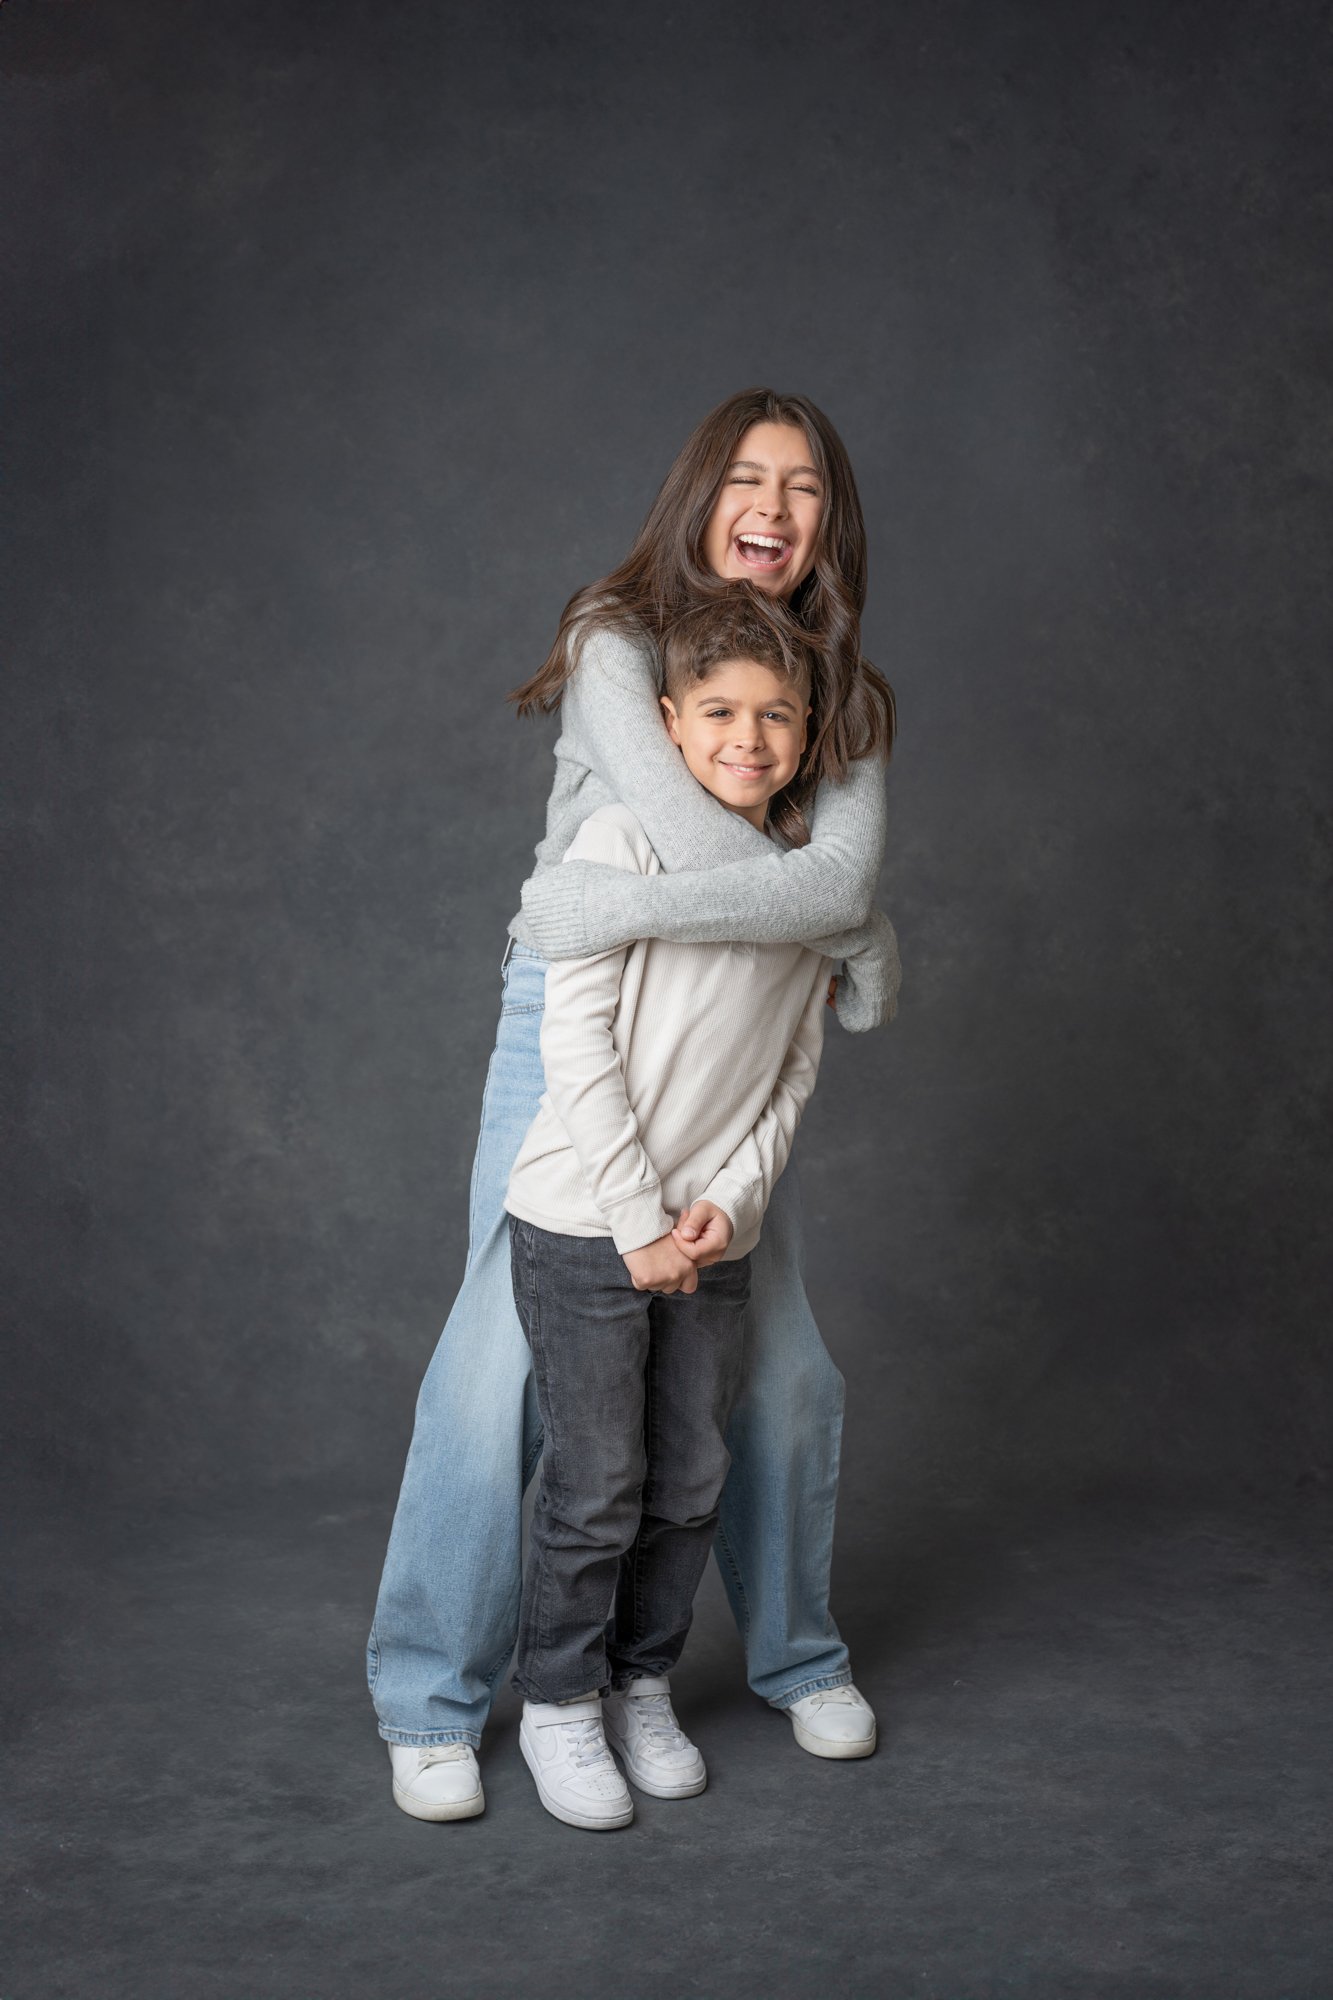   Mom hugging preteen son during a studio portrait session with Nicole Hawkins, Northern New Jersey Family Photographer. Mother son photo pose ideas family photo pose suggestions #UnionCountyFamilyPhotographer #PassaicCountyFamilyPhotographer #Northe